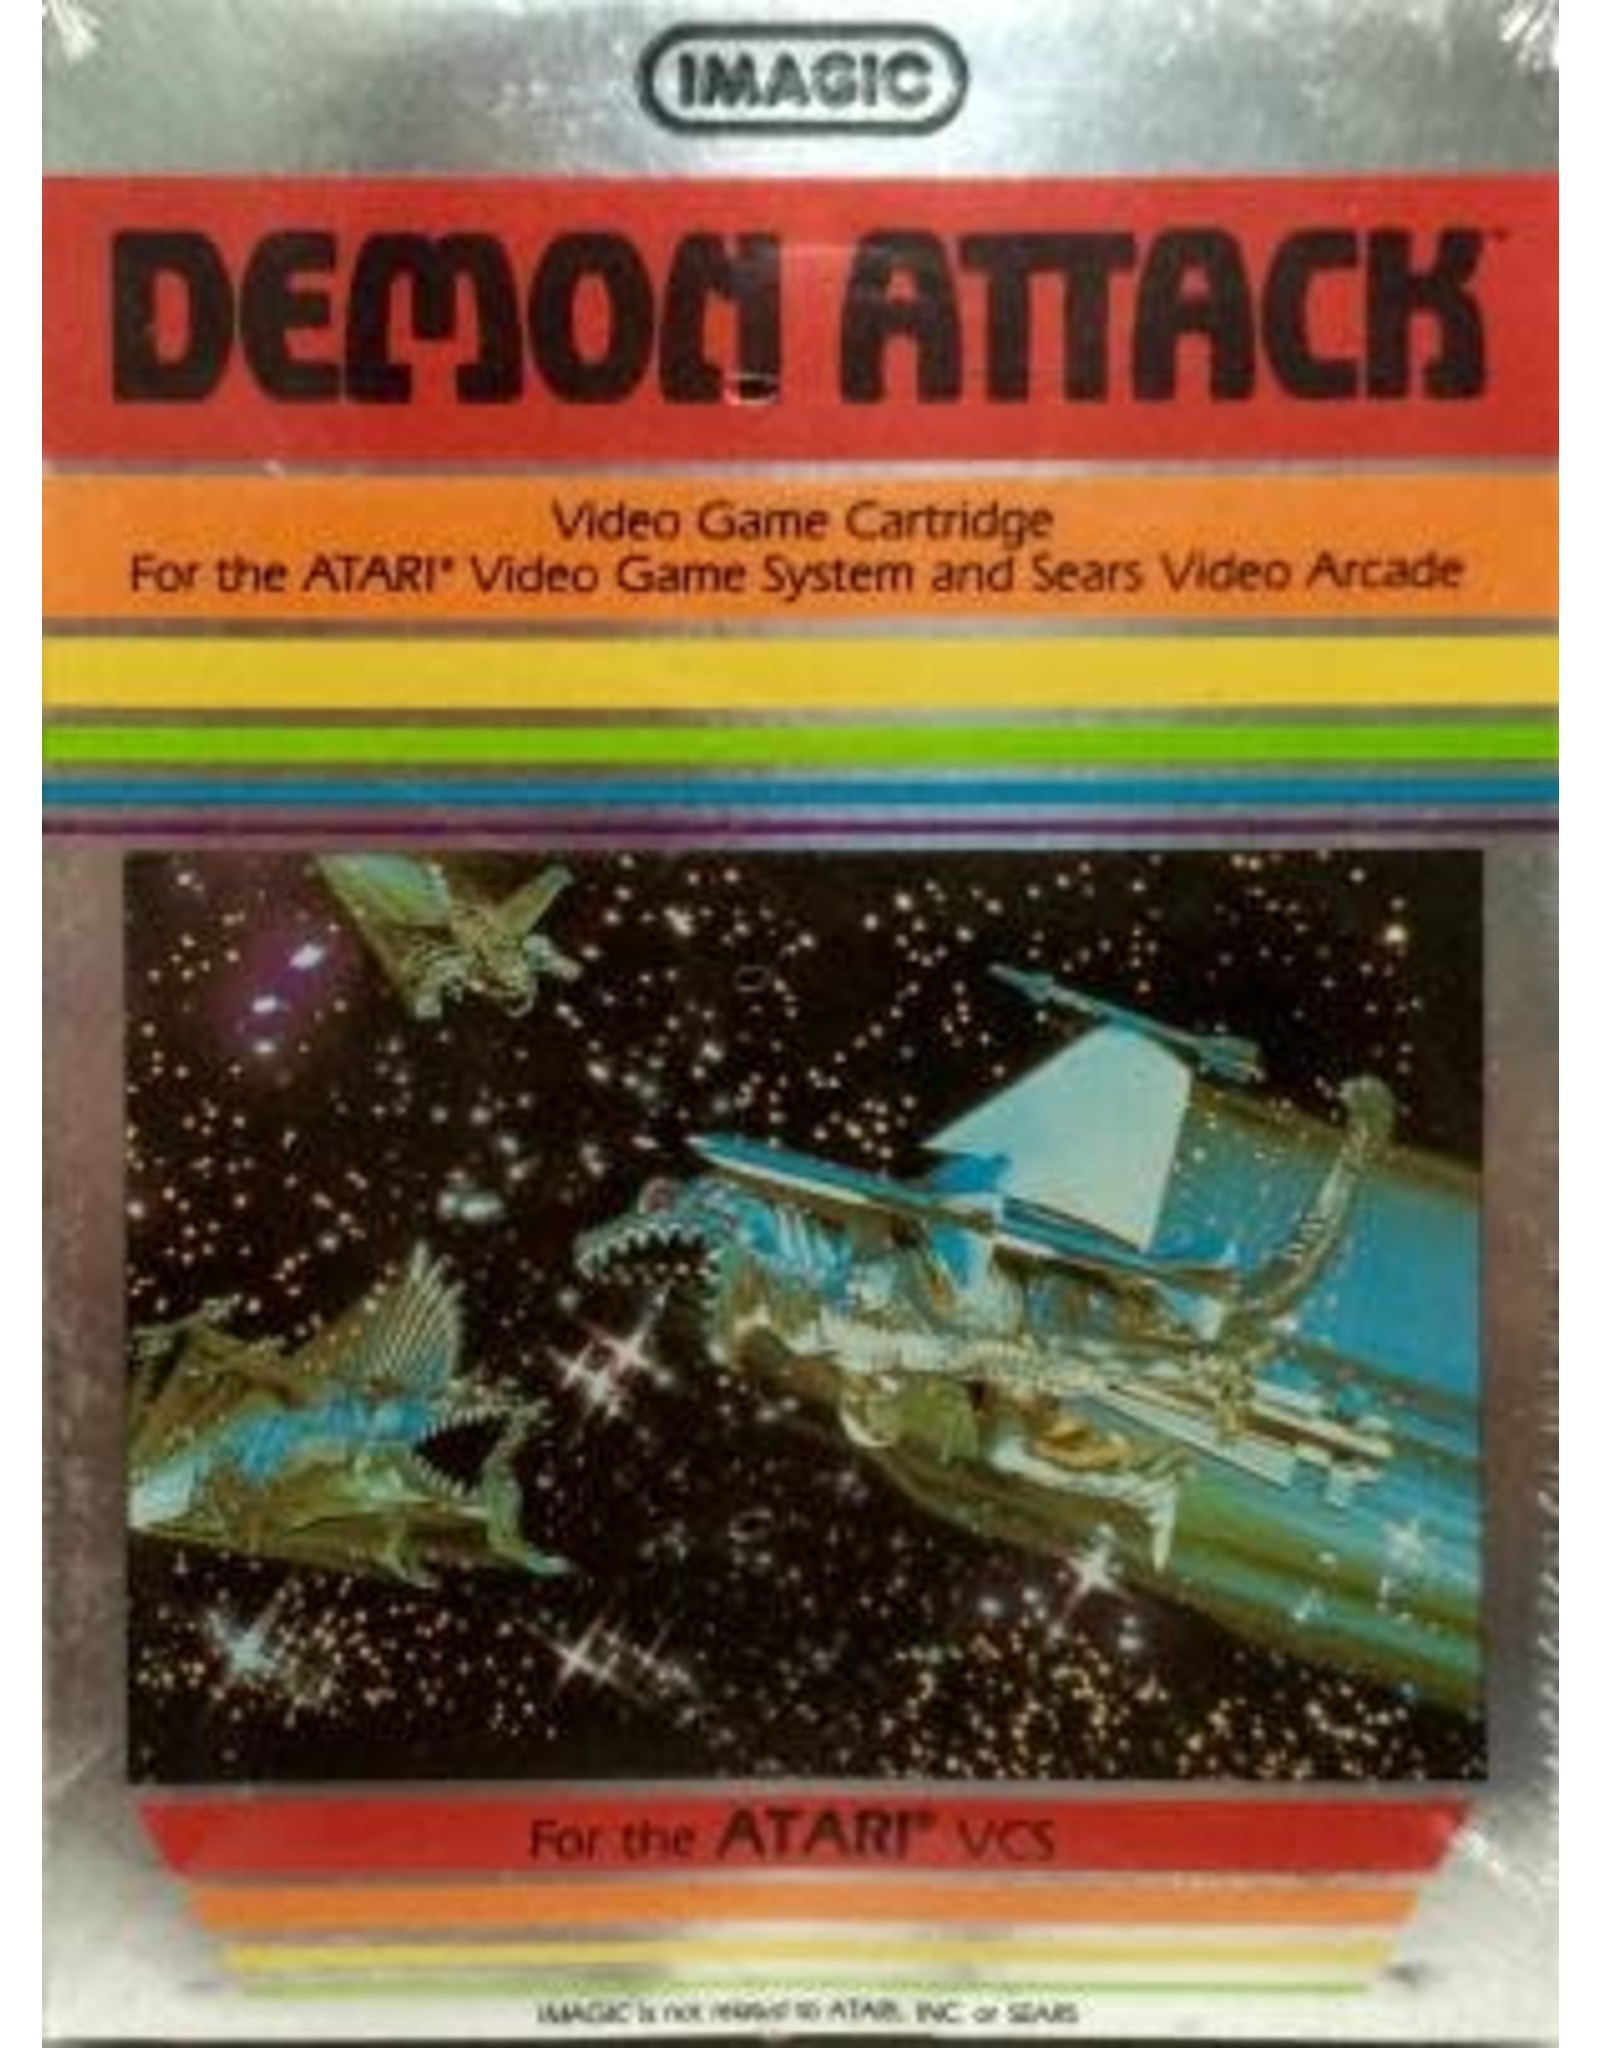 Atari 2600 Demon Attack (Text Label, Cart Only, Rough Label)